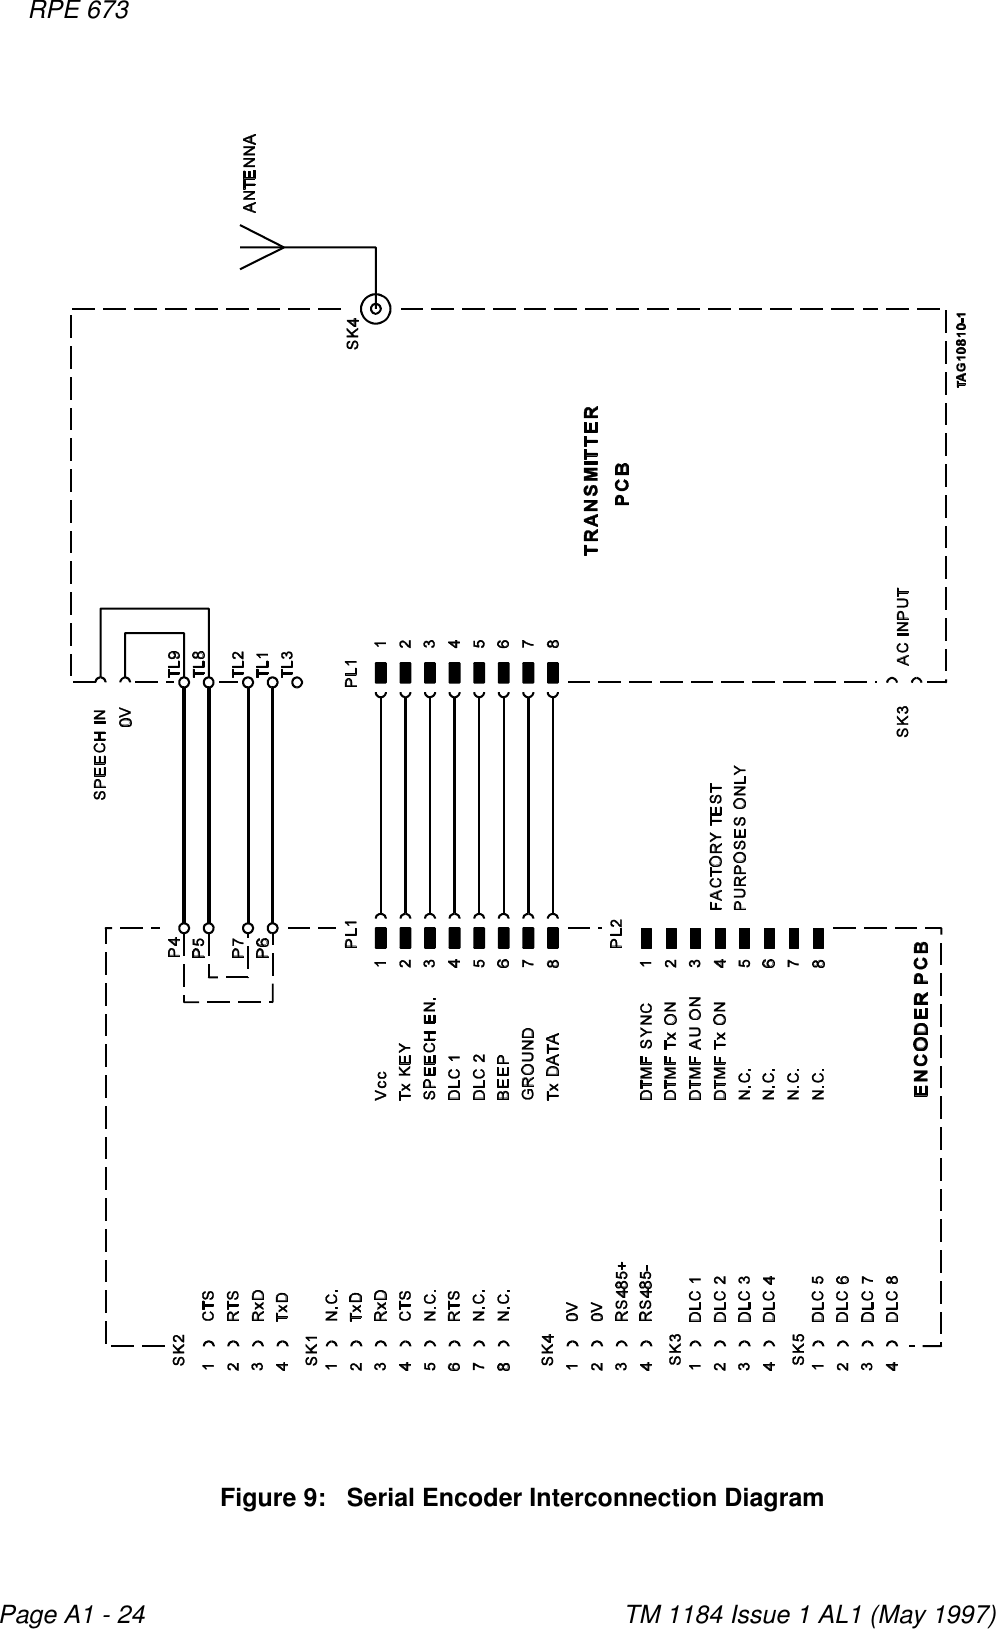 RPE 673    TM 1184 Issue 1 AL1 (May 1997)Page A1 - 24Figure 9:   Serial Encoder Interconnection Diagram